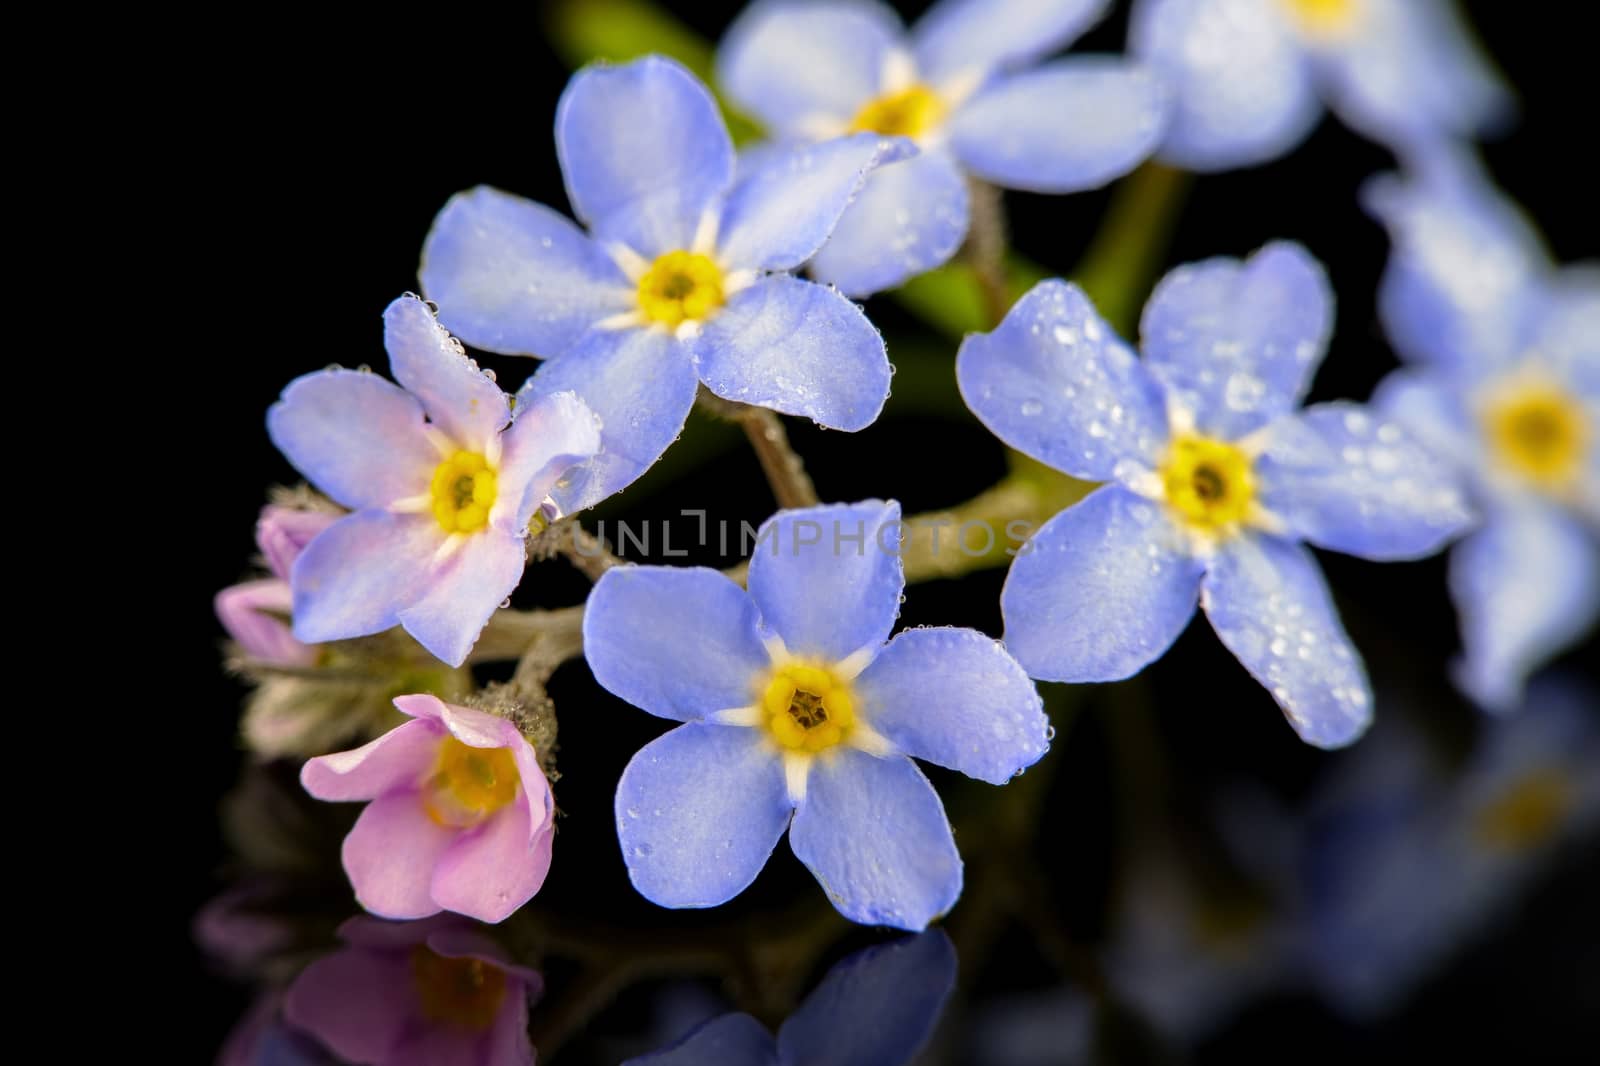 little colorful flowers with water droplets by Rik